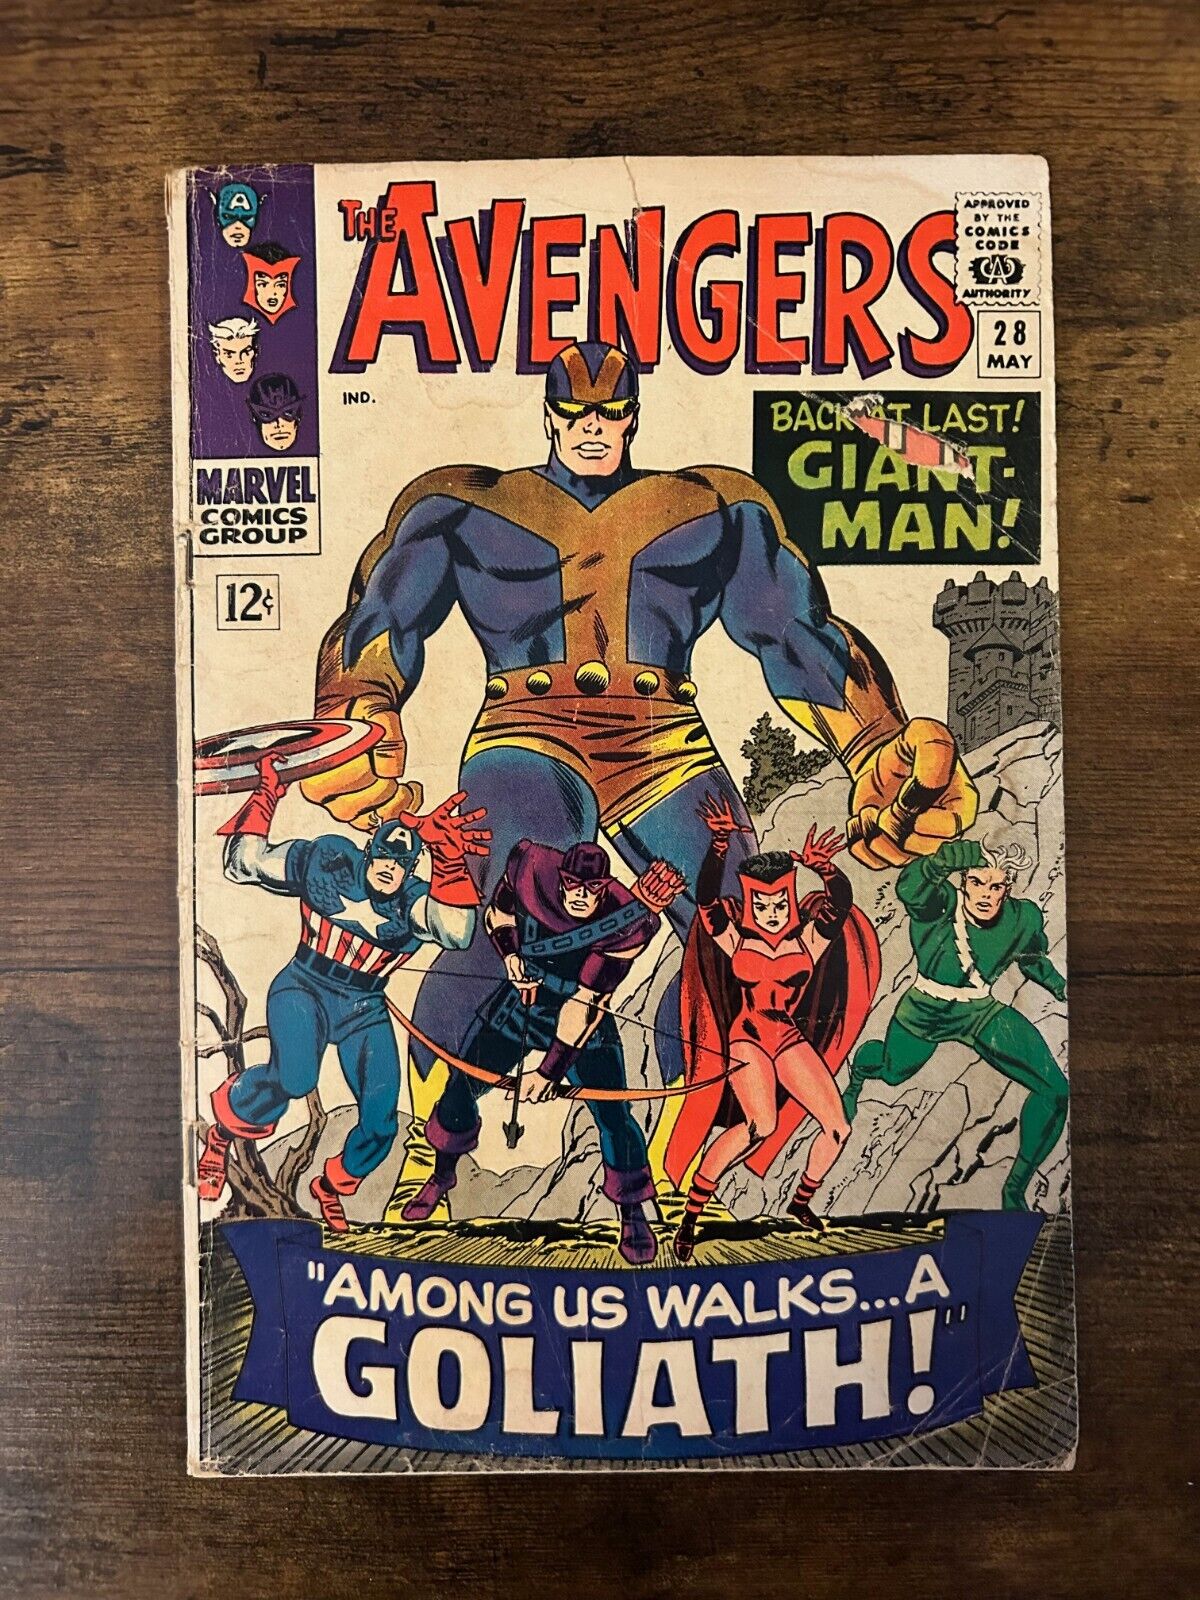 Avengers #28 Marvel Comics (May, 1966) 2.5 GD+ 1st App Goliath Collector